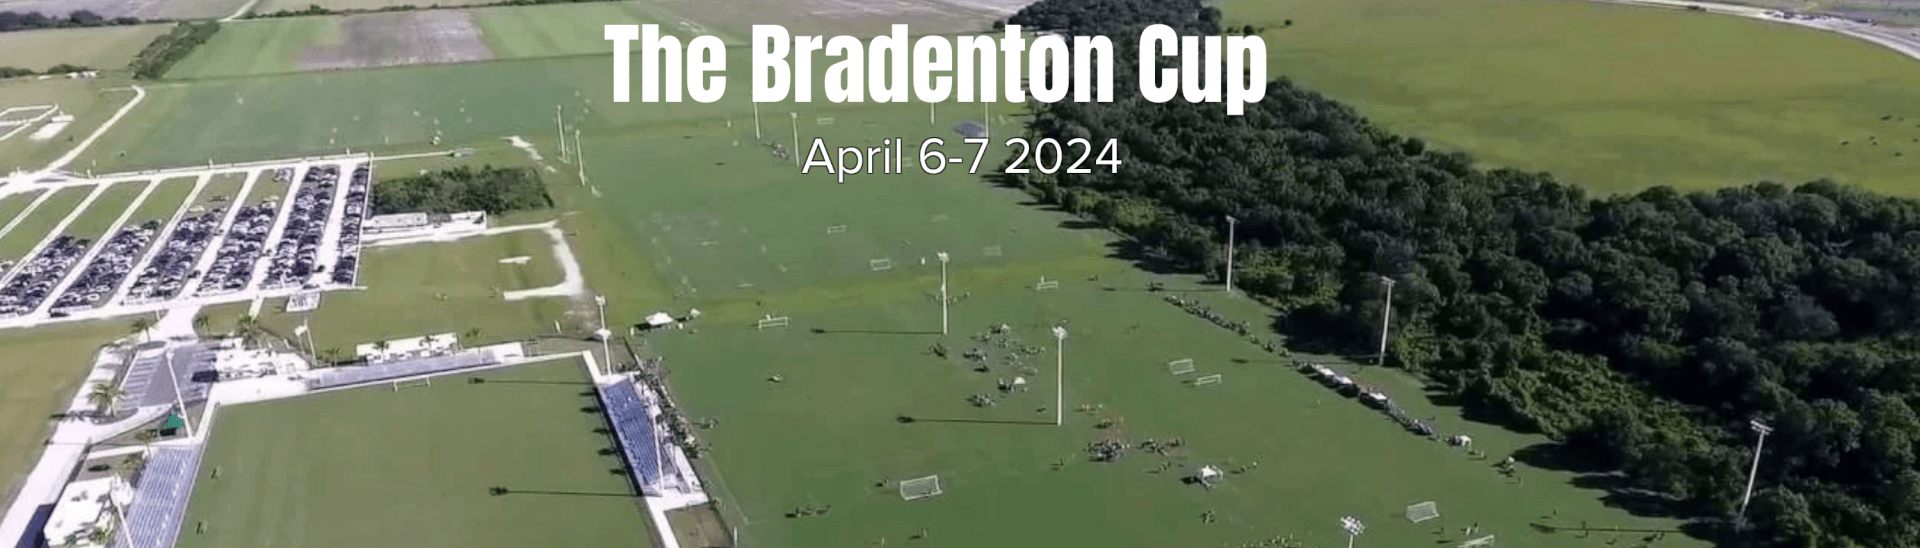 Bradenton Cup April 6-7 2024 with aerial of Premier Sports Campus